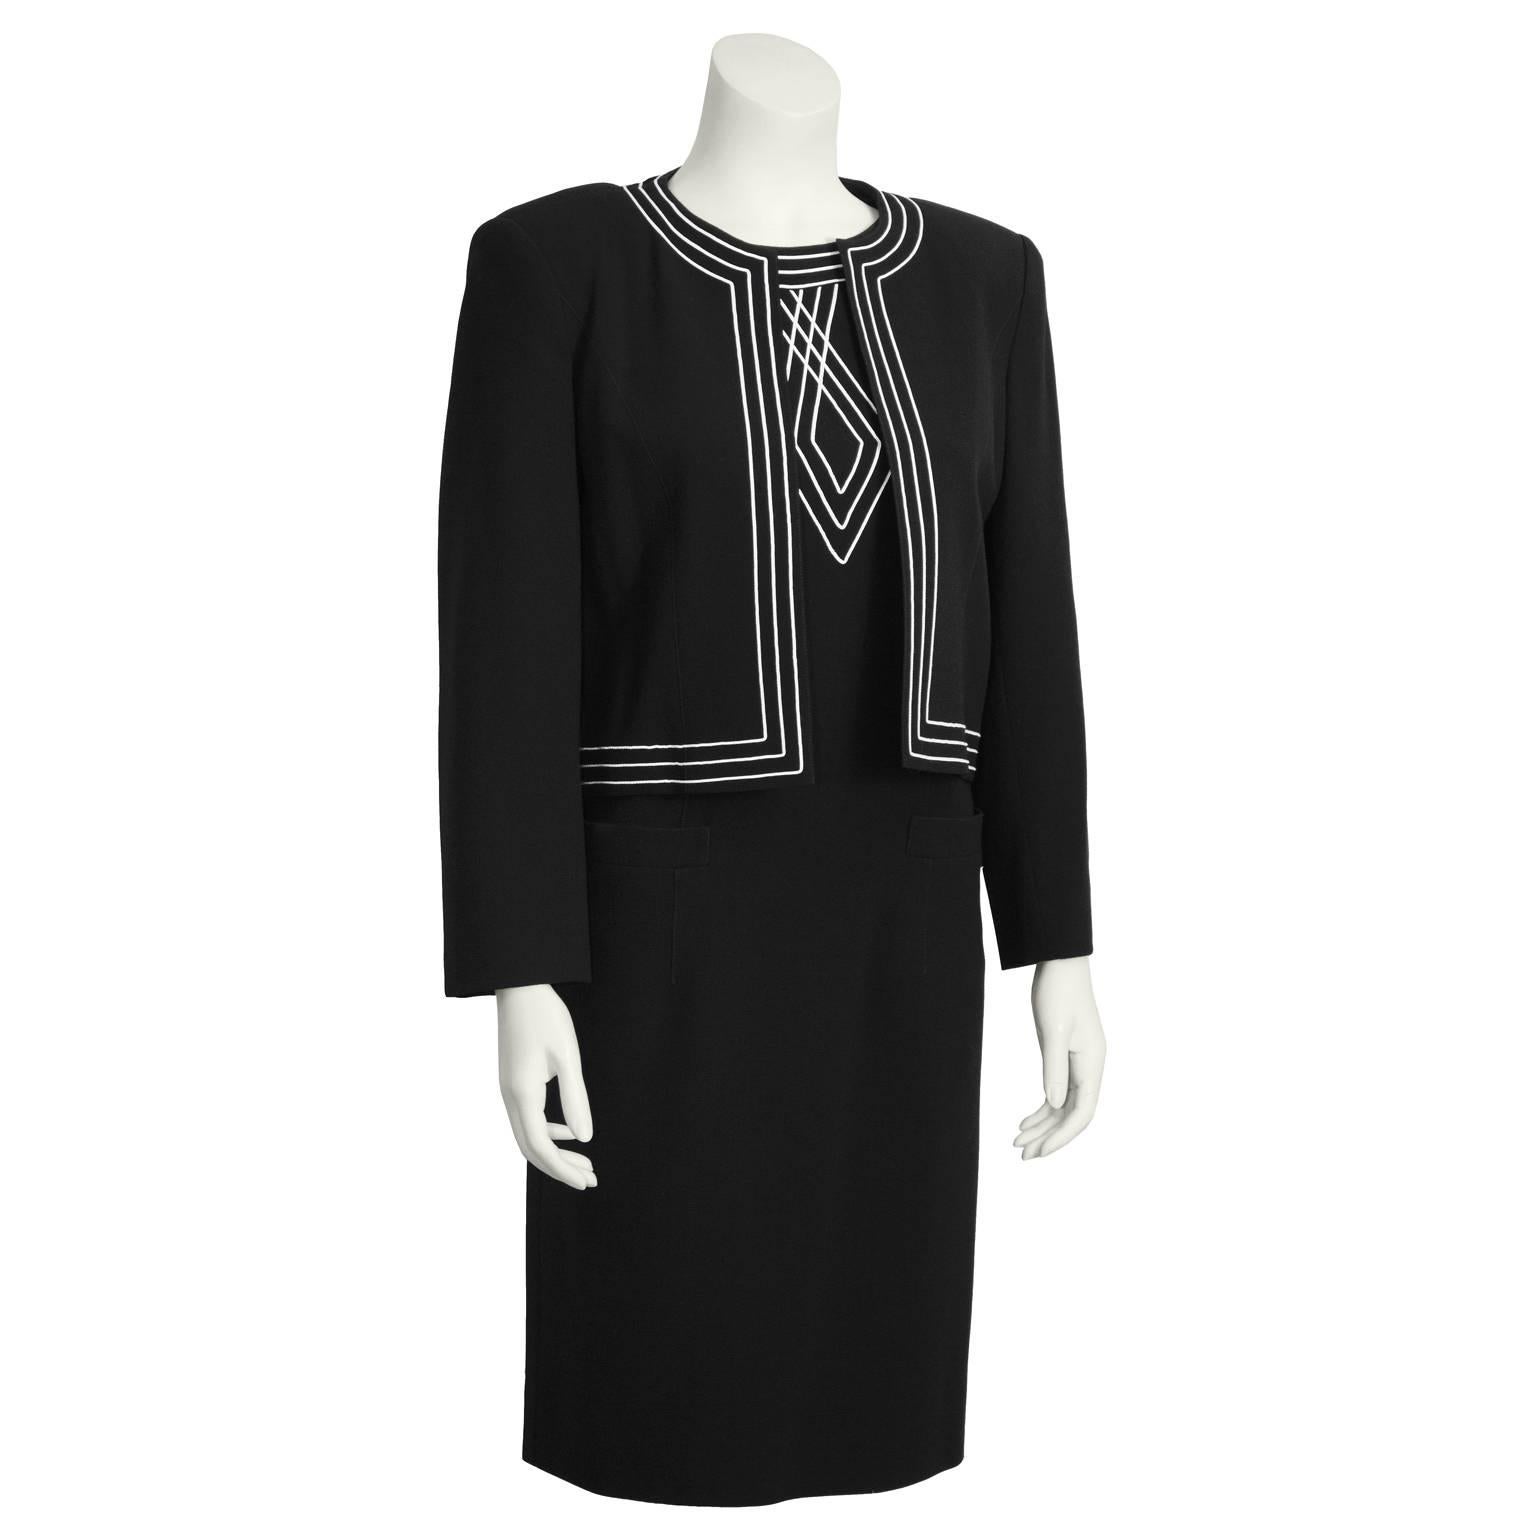 Sophisticated and elegant 1970's Louis Feraud black dress and jacket duo with white embroidery. Sleeveless sheath dress has two patch pockets and a back zip closure. Cropped jacket has embroidered trim and design on the back. Excellent vintage